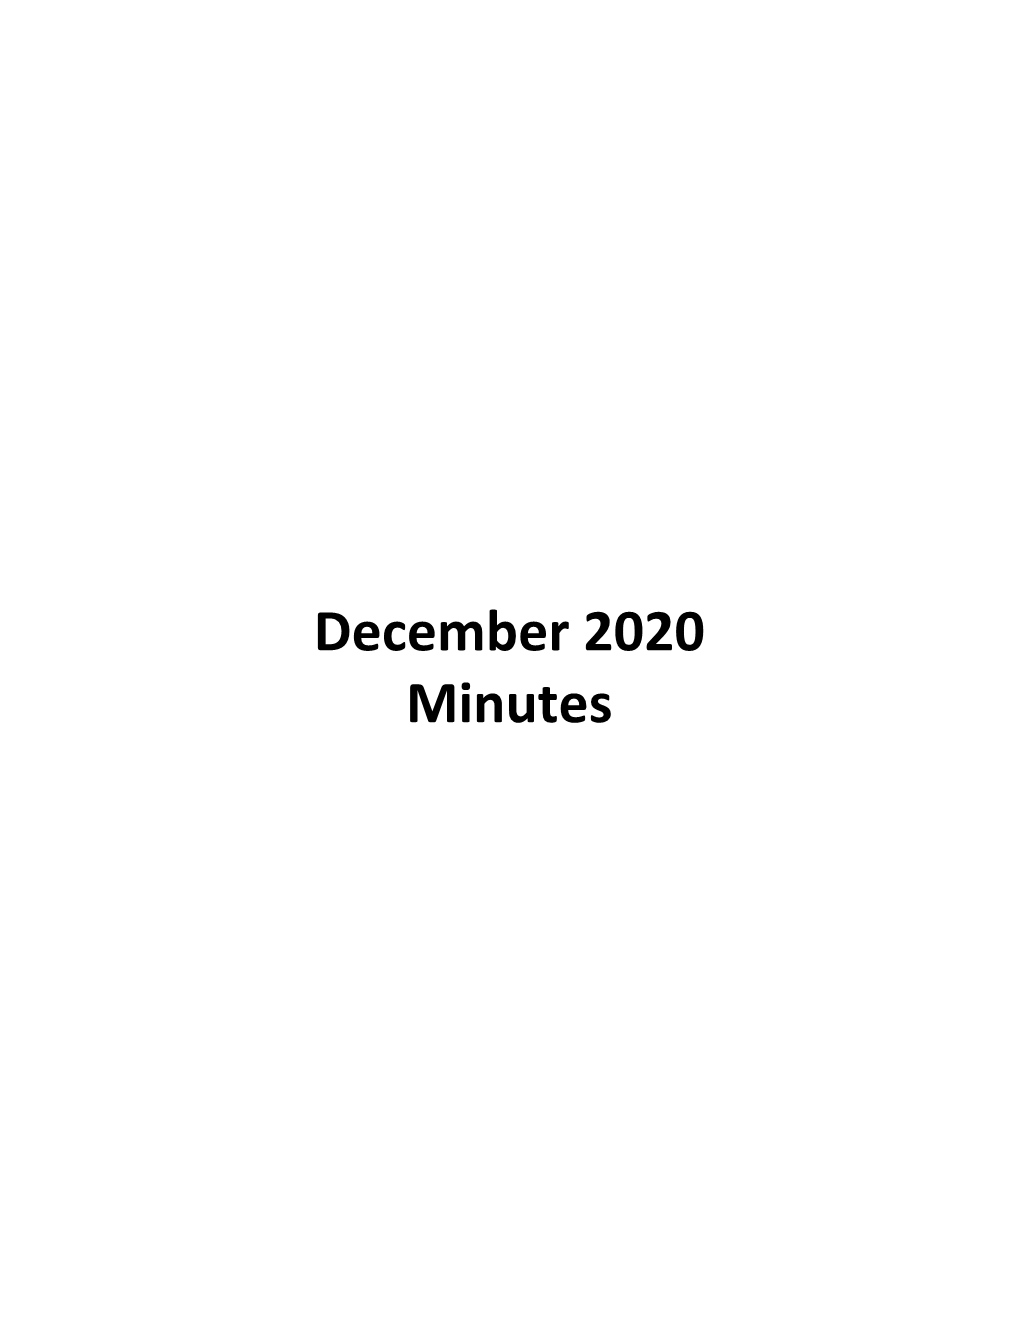 Budget Committee Minutes December 16, 2020 9:00 A.M